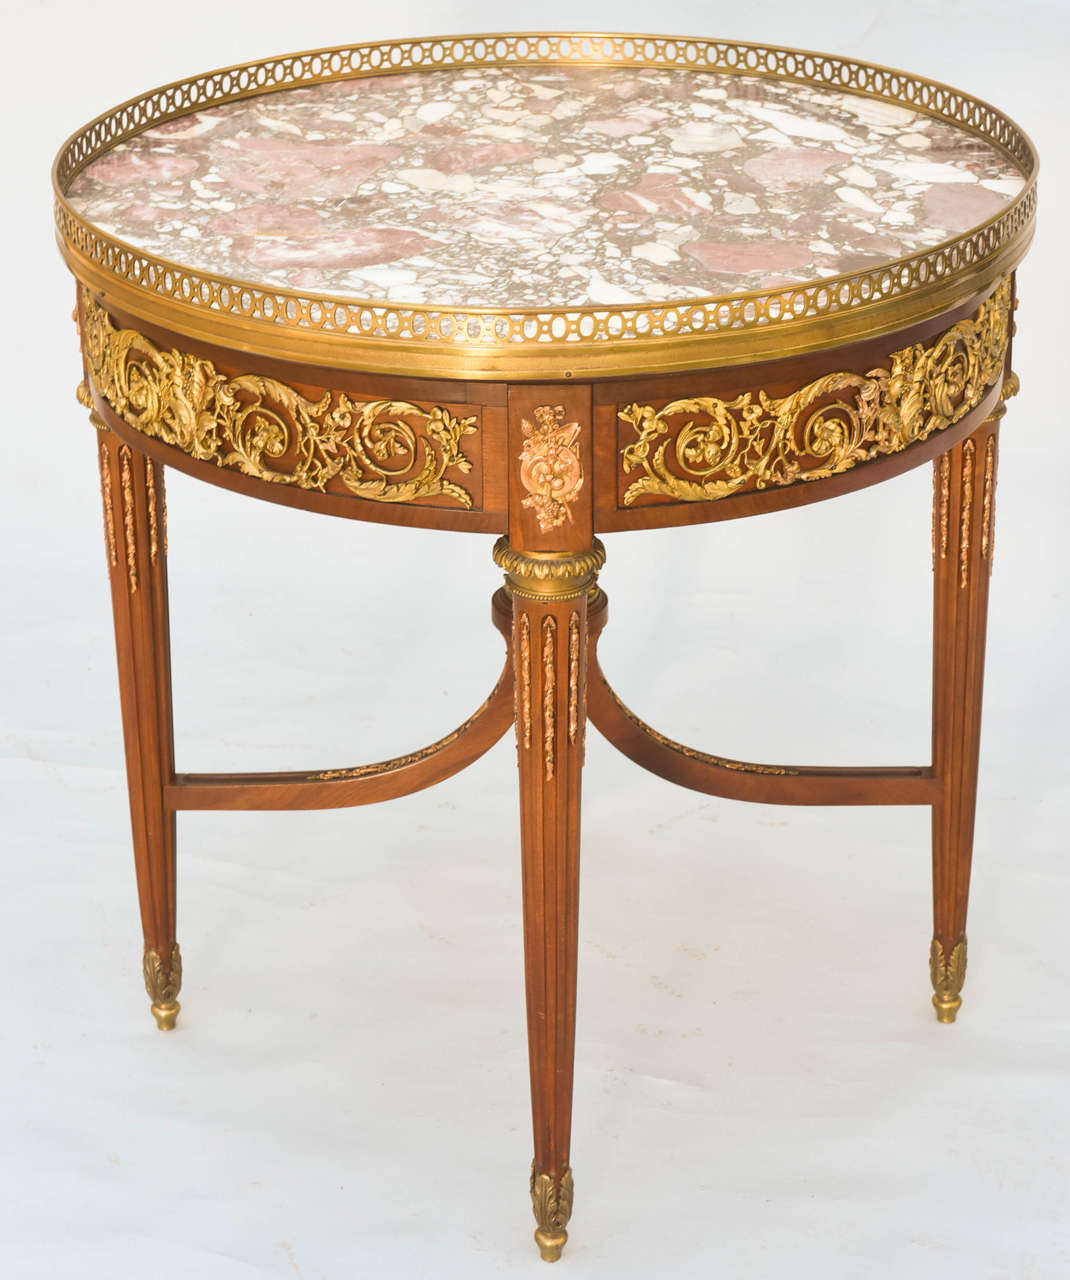 Very fine bouillotte accent table, having breccia rosa marble top with brass gallery, apron with ormolu mounts, raised on fluted legs, connected by dramatic upswept stretcher with acanthus crown.

Stock ID: D9242